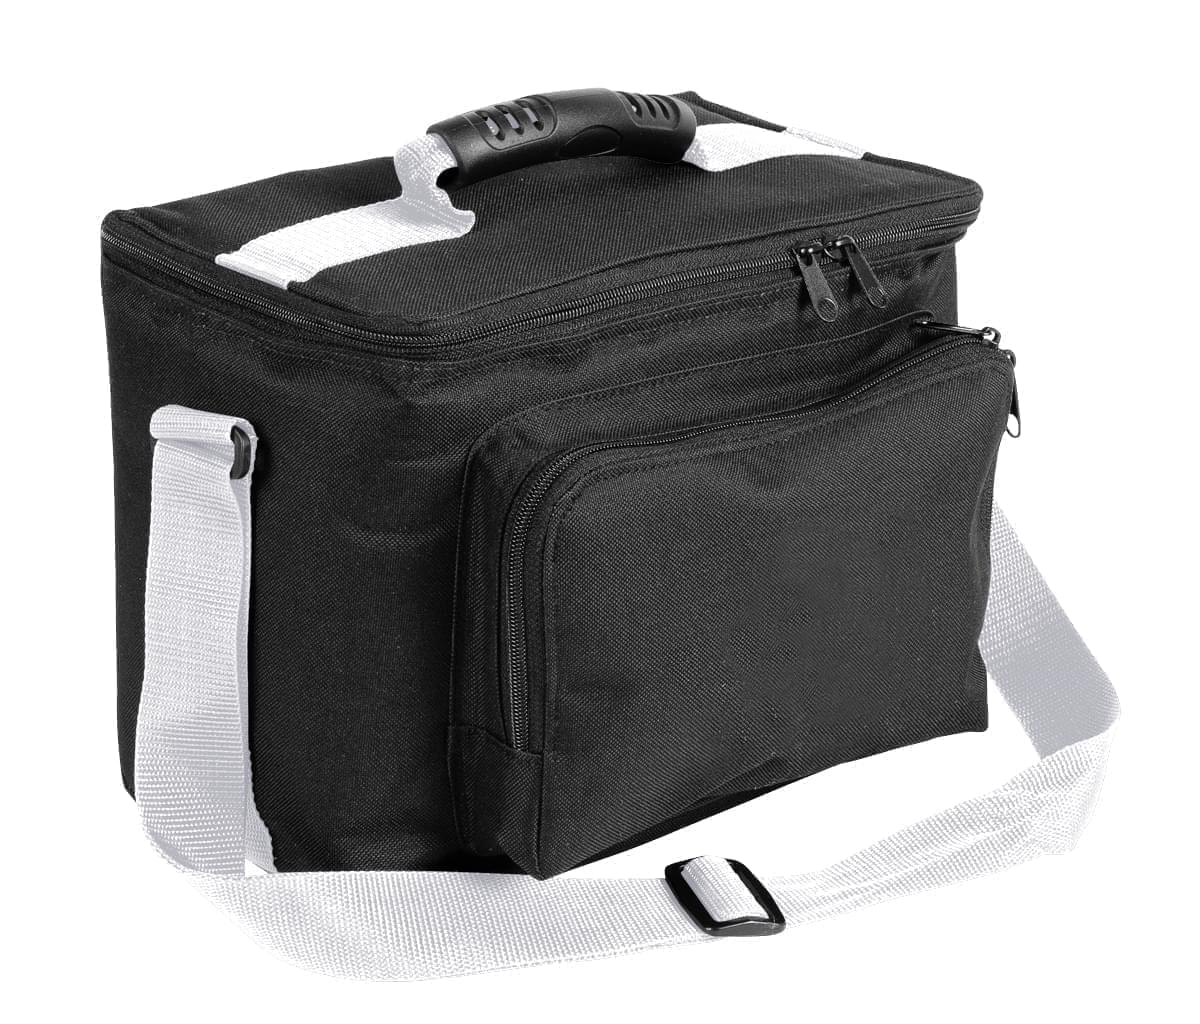 USA Made Nylon Poly Lunch Coolers, Black-White, 11001161-AO4